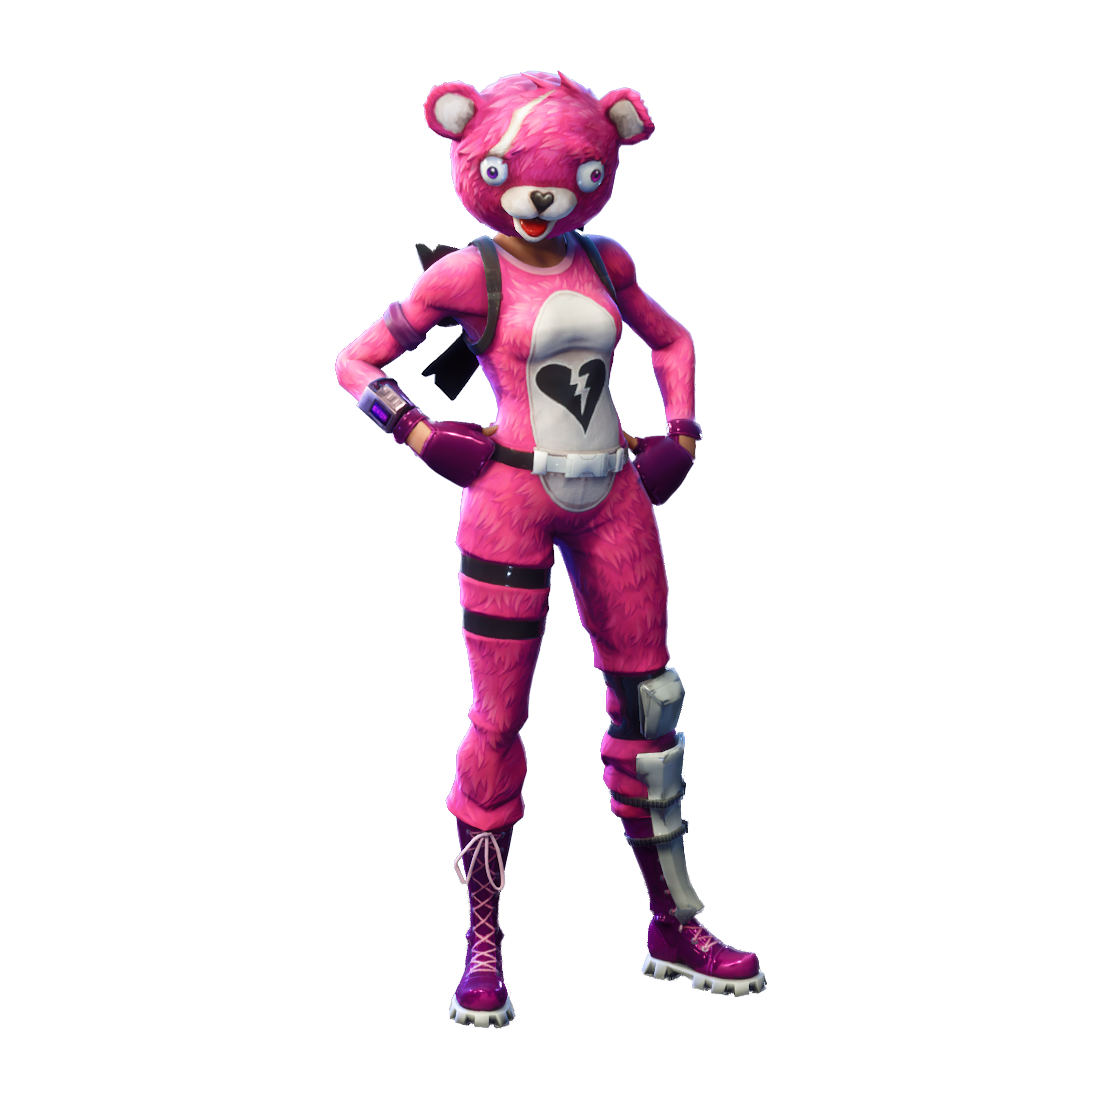 Toy Character Fictional Royale Game Fortnite Battle PNG Image